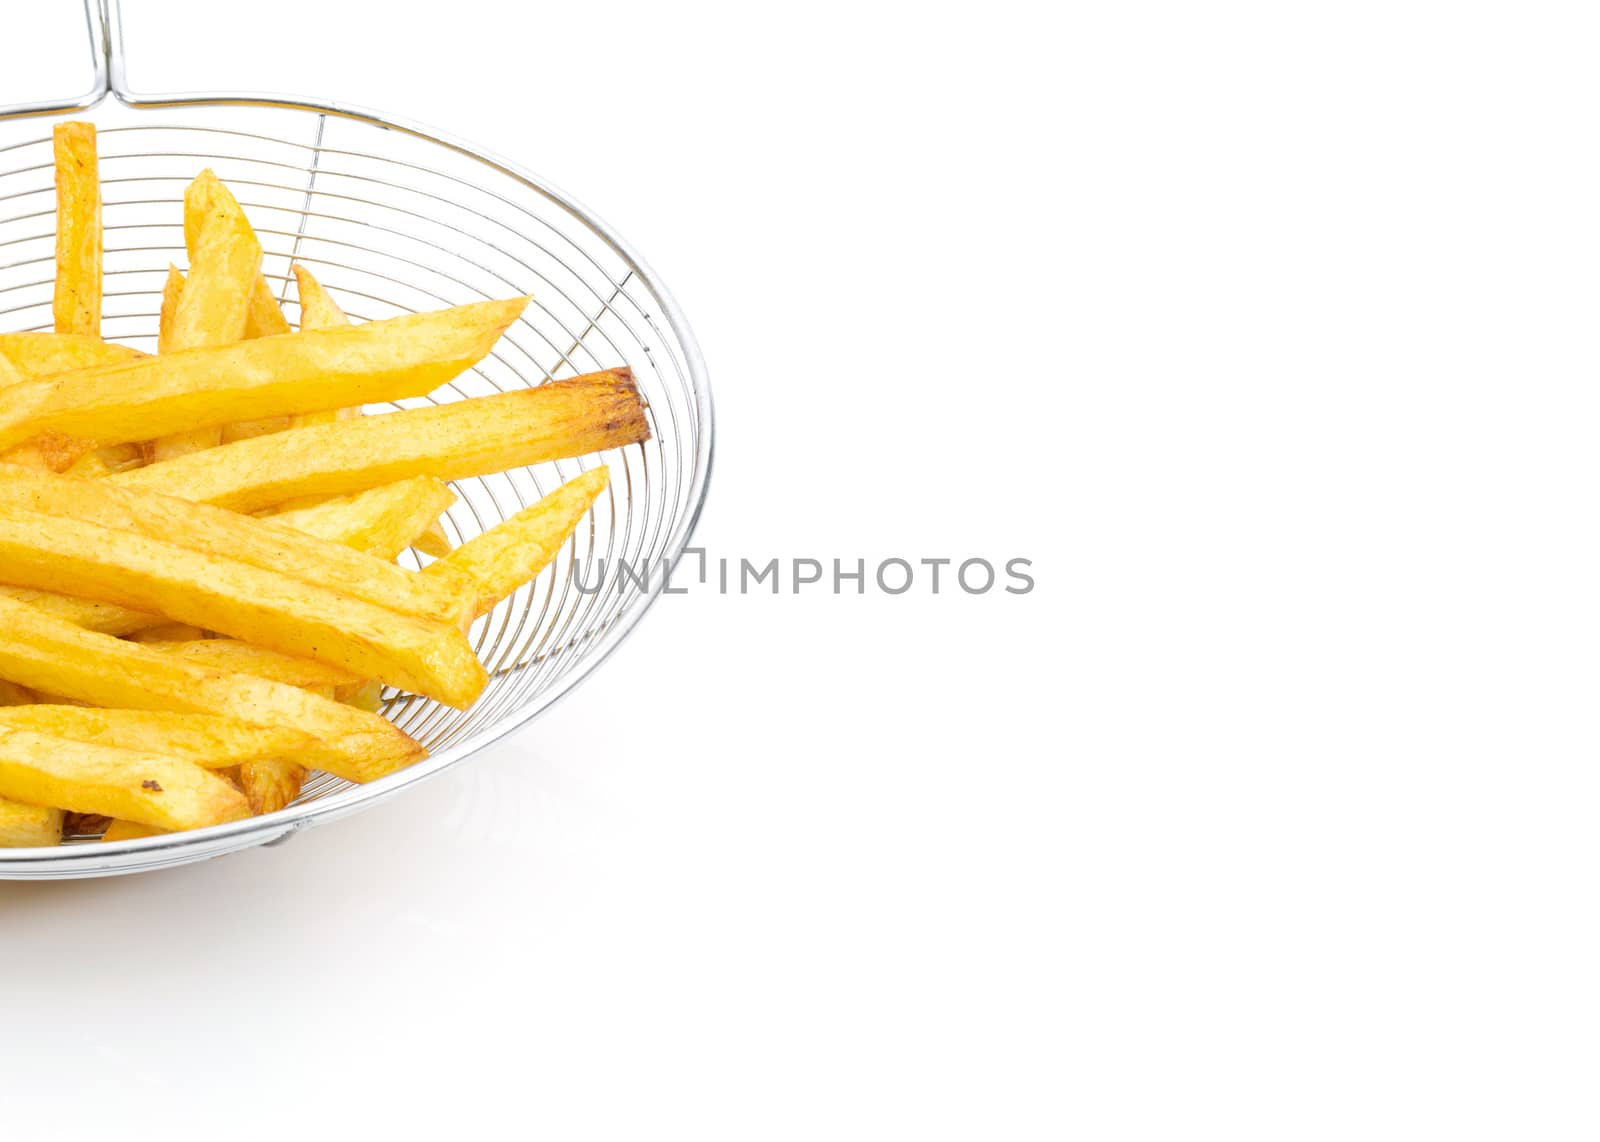 Potato french fries on a white background and free space by sompongtom